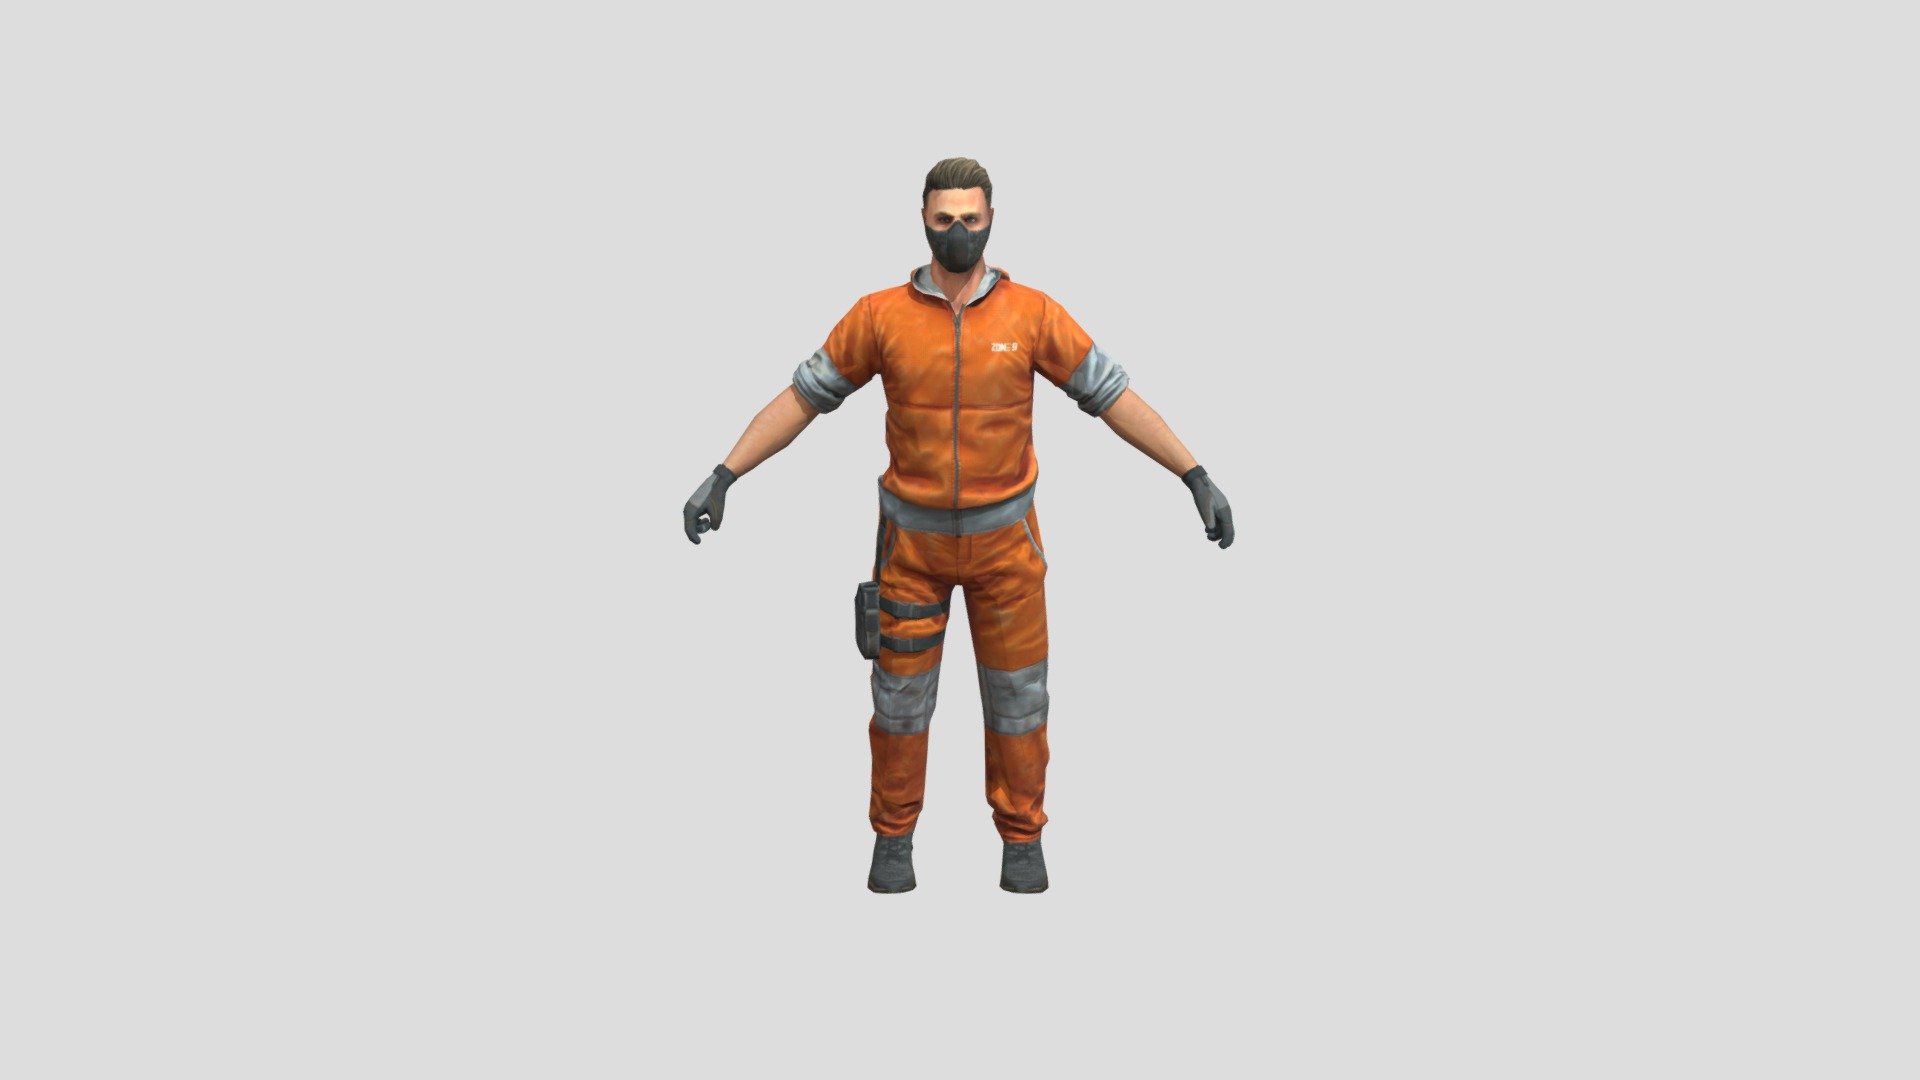 This is a Terrorist Model In Zone 9 And Ripped From The Game Called: Standoff 2
Have fun with this model! - Zone 9 Terrorists Model Standoff 2 - Download Free 3D model by bksongfan (@veterbaev354) 3d model